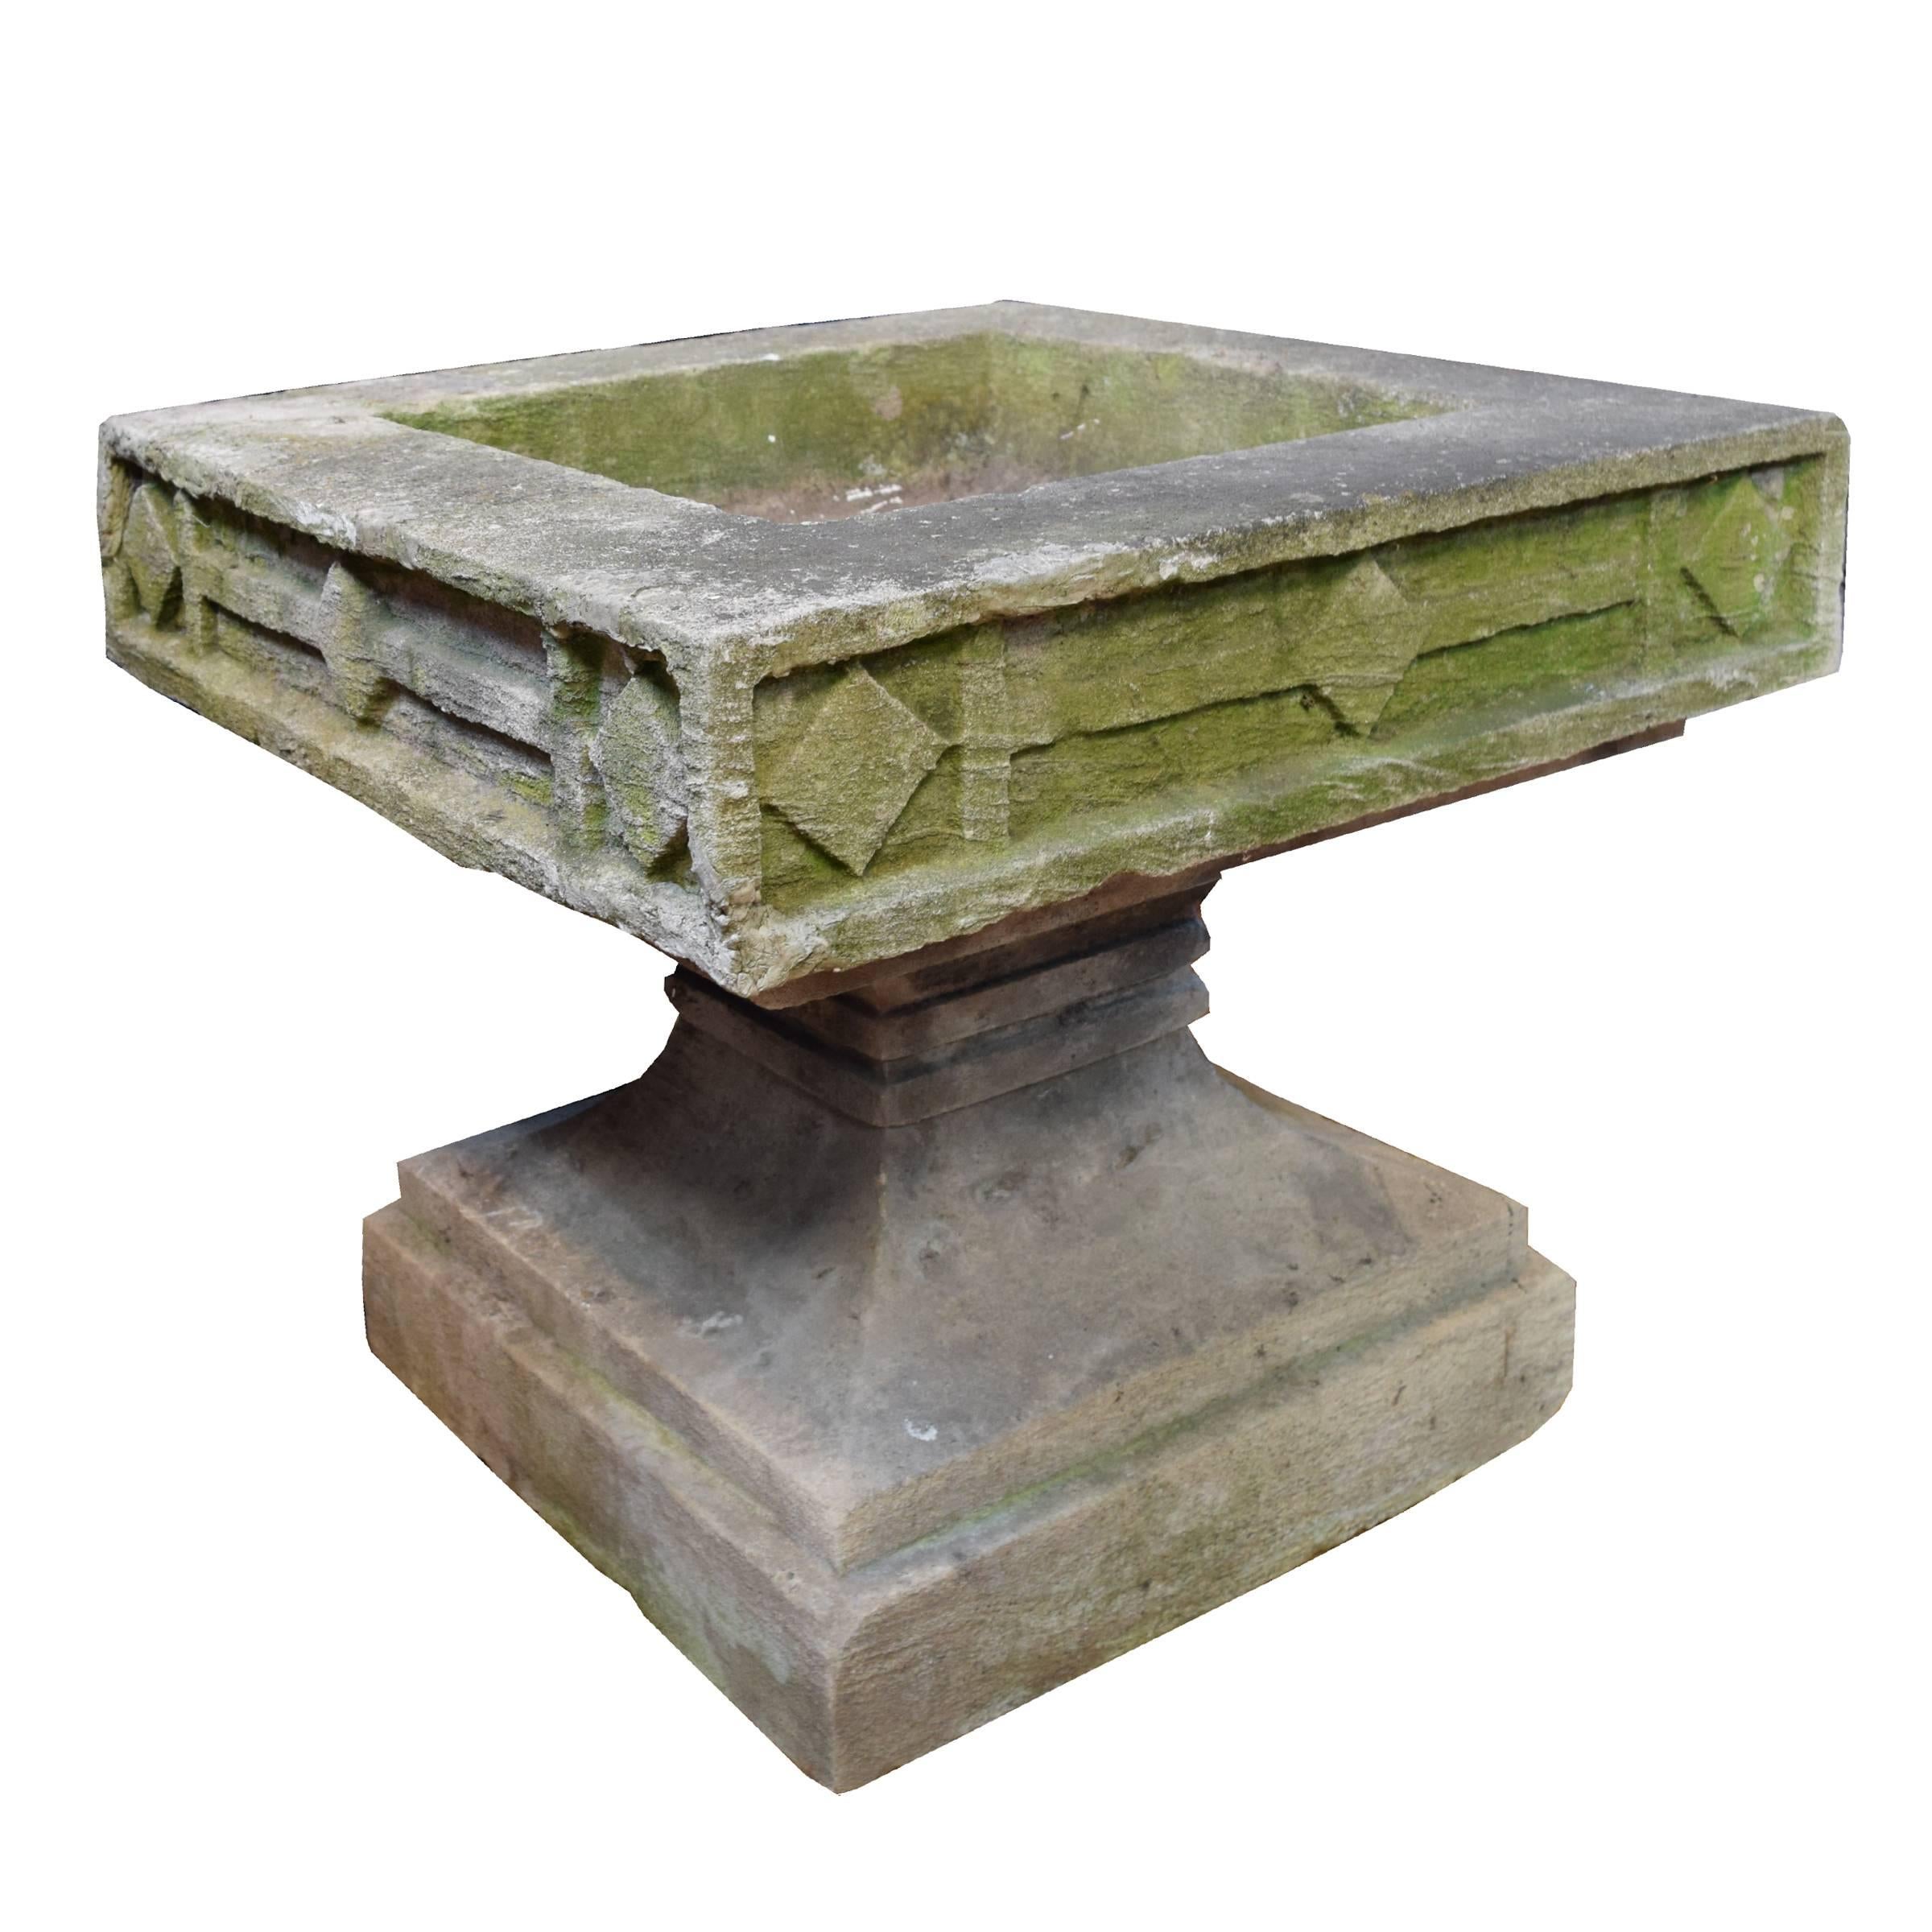 An American carved limestone Prairie School planter with a great moss covered surface.